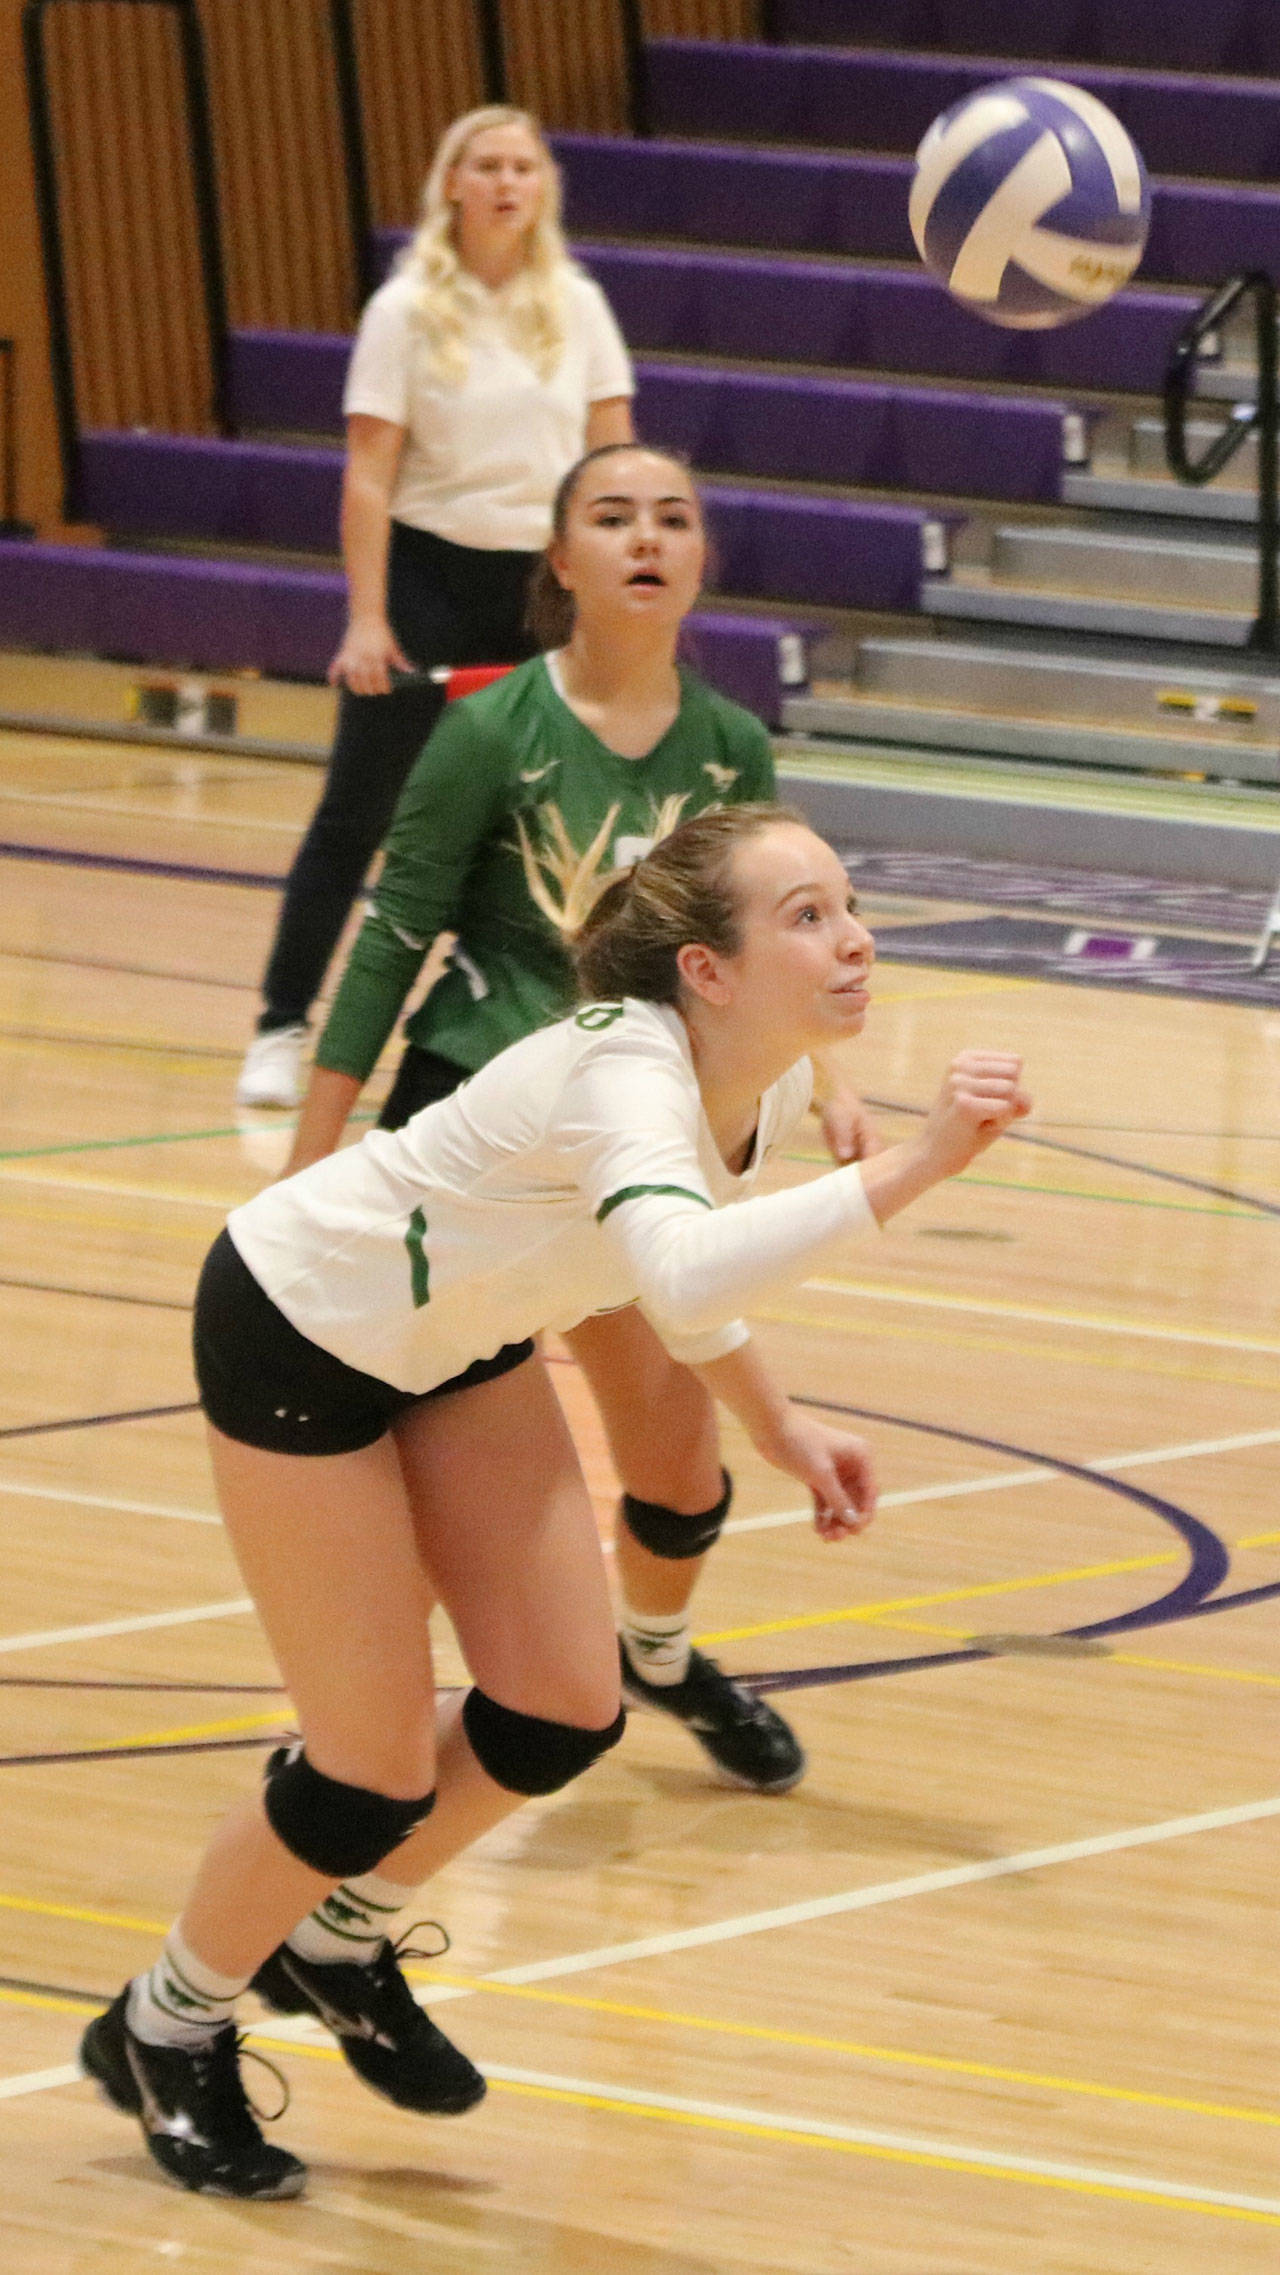 On the ball: Redmond High’s Megan Golembeski, front, and Mari Torgerson, back, during their Oct. 25 match. Andy Nystrom / staff photo